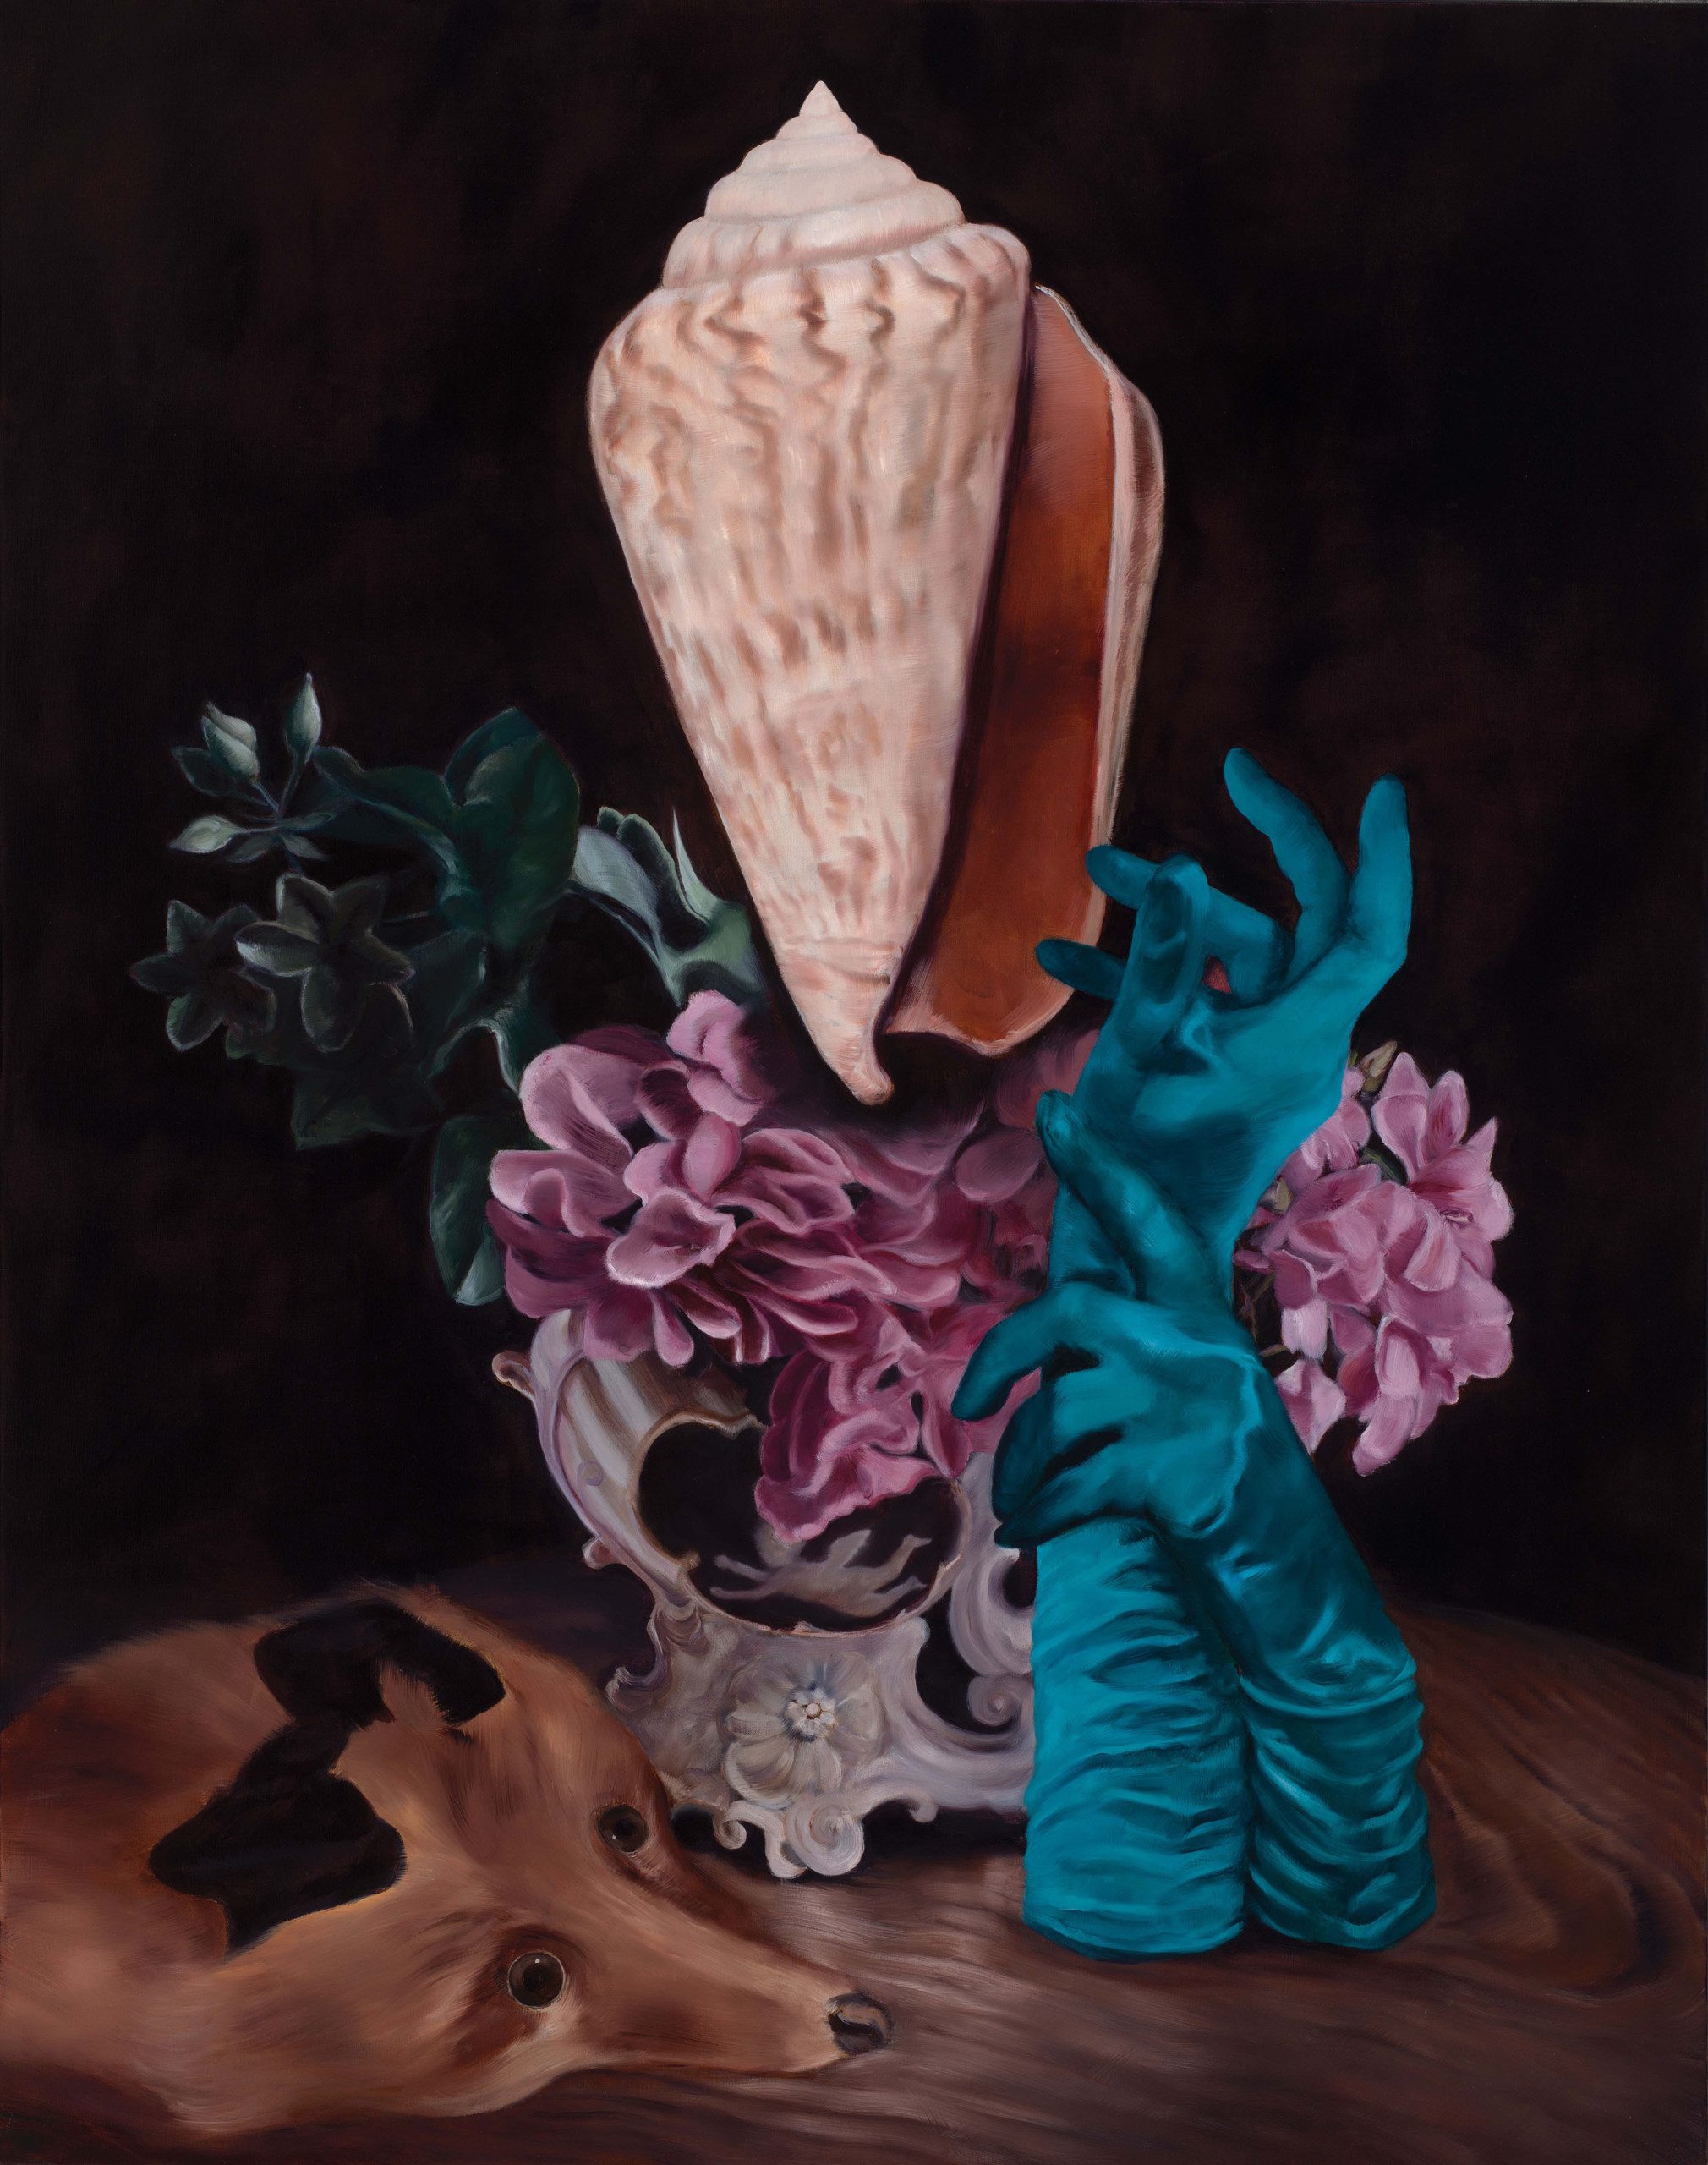 Heidi Yardley 'Drenched in a lonely vase' 2021 oil on linen 140 x 110 cm